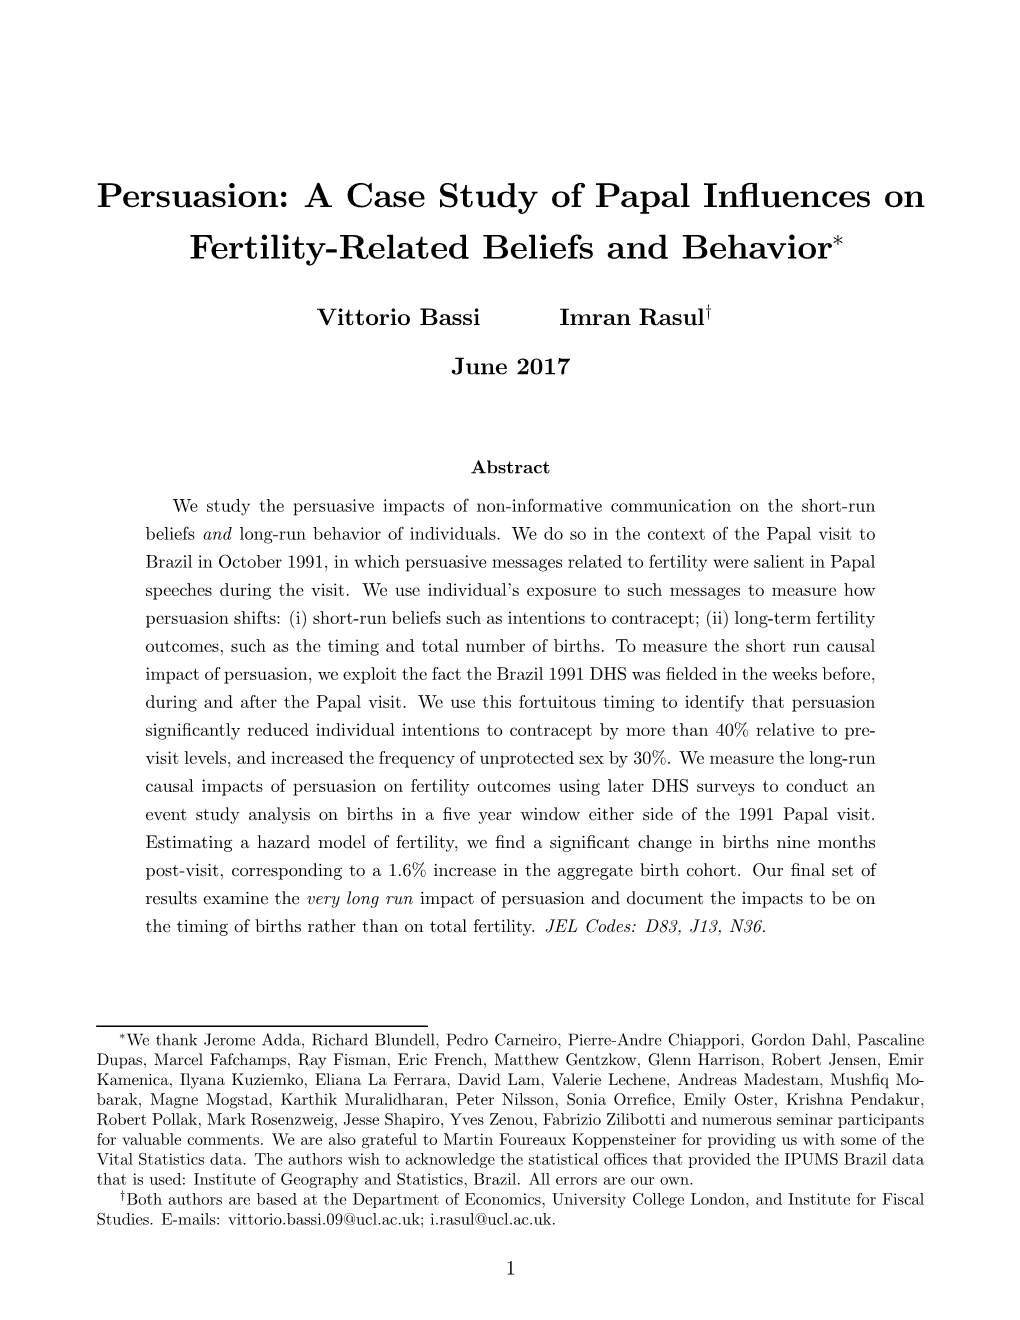 A Case Study of Papal Influences on Fertility-Related Beliefs and Behavior